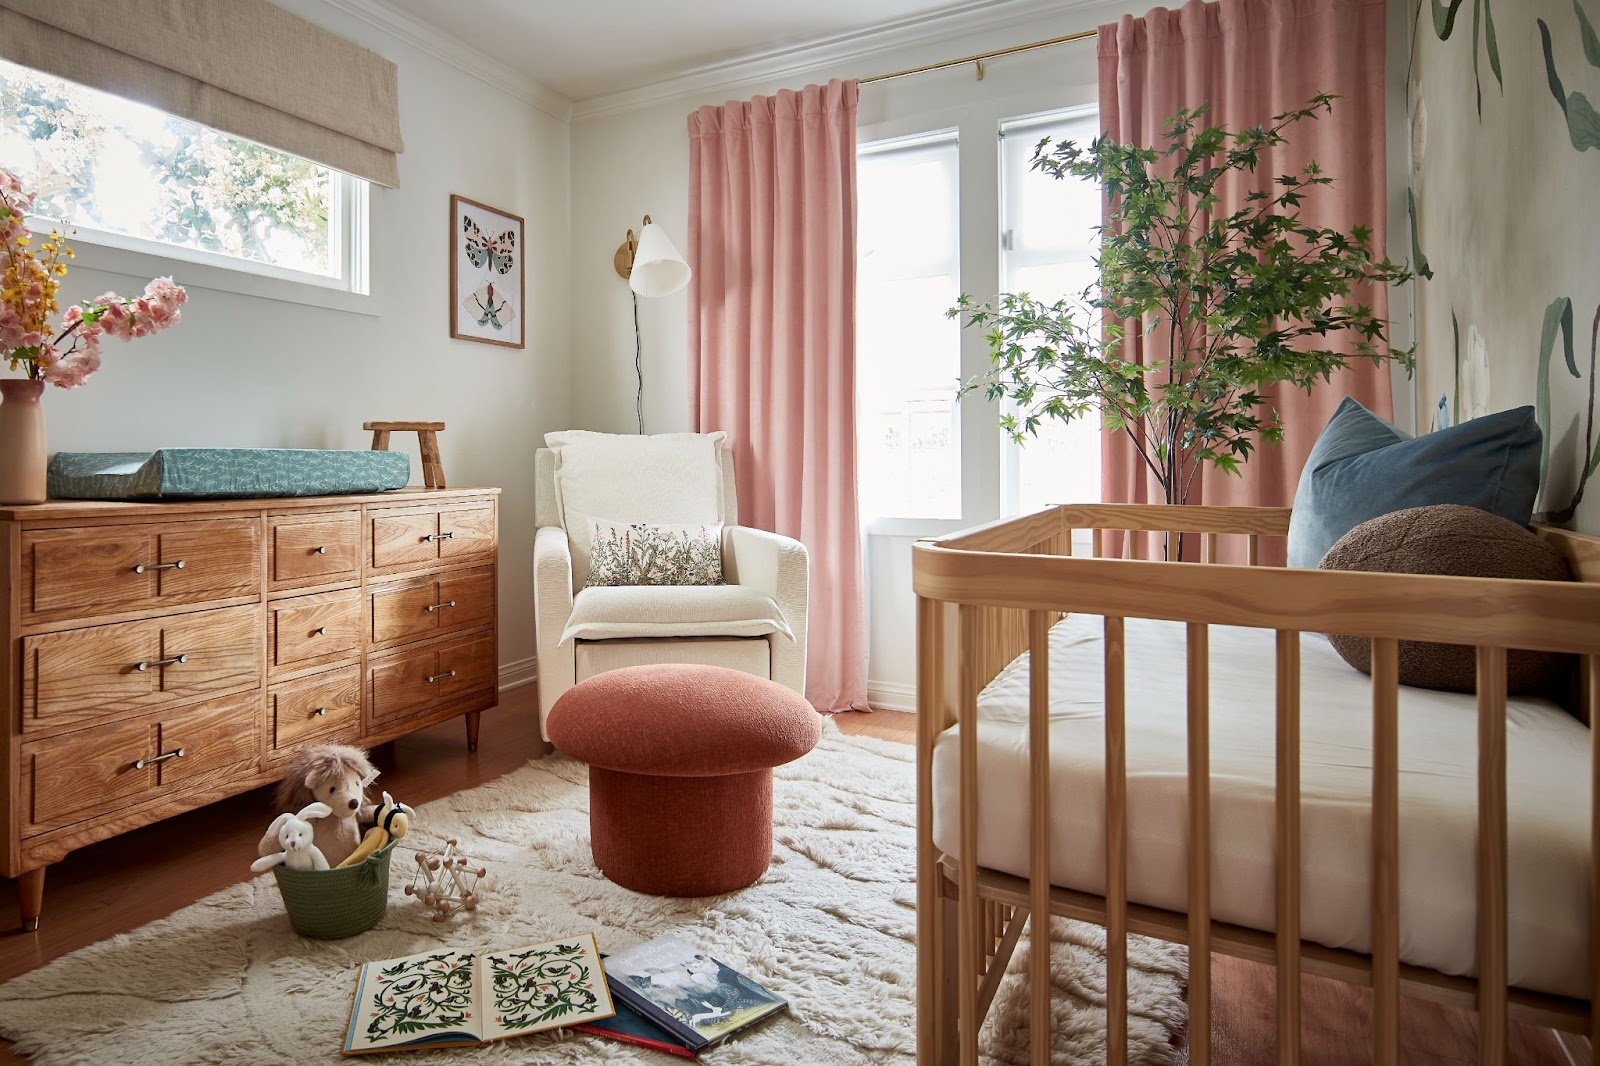 Charming kid's bedroom with a pastel pink theme. Pink curtains, ottoman, and flowers complement neutral tones. Natural wooden chest of drawers, and a warm, furry white carpet create a cozy and delightful atmosphere.